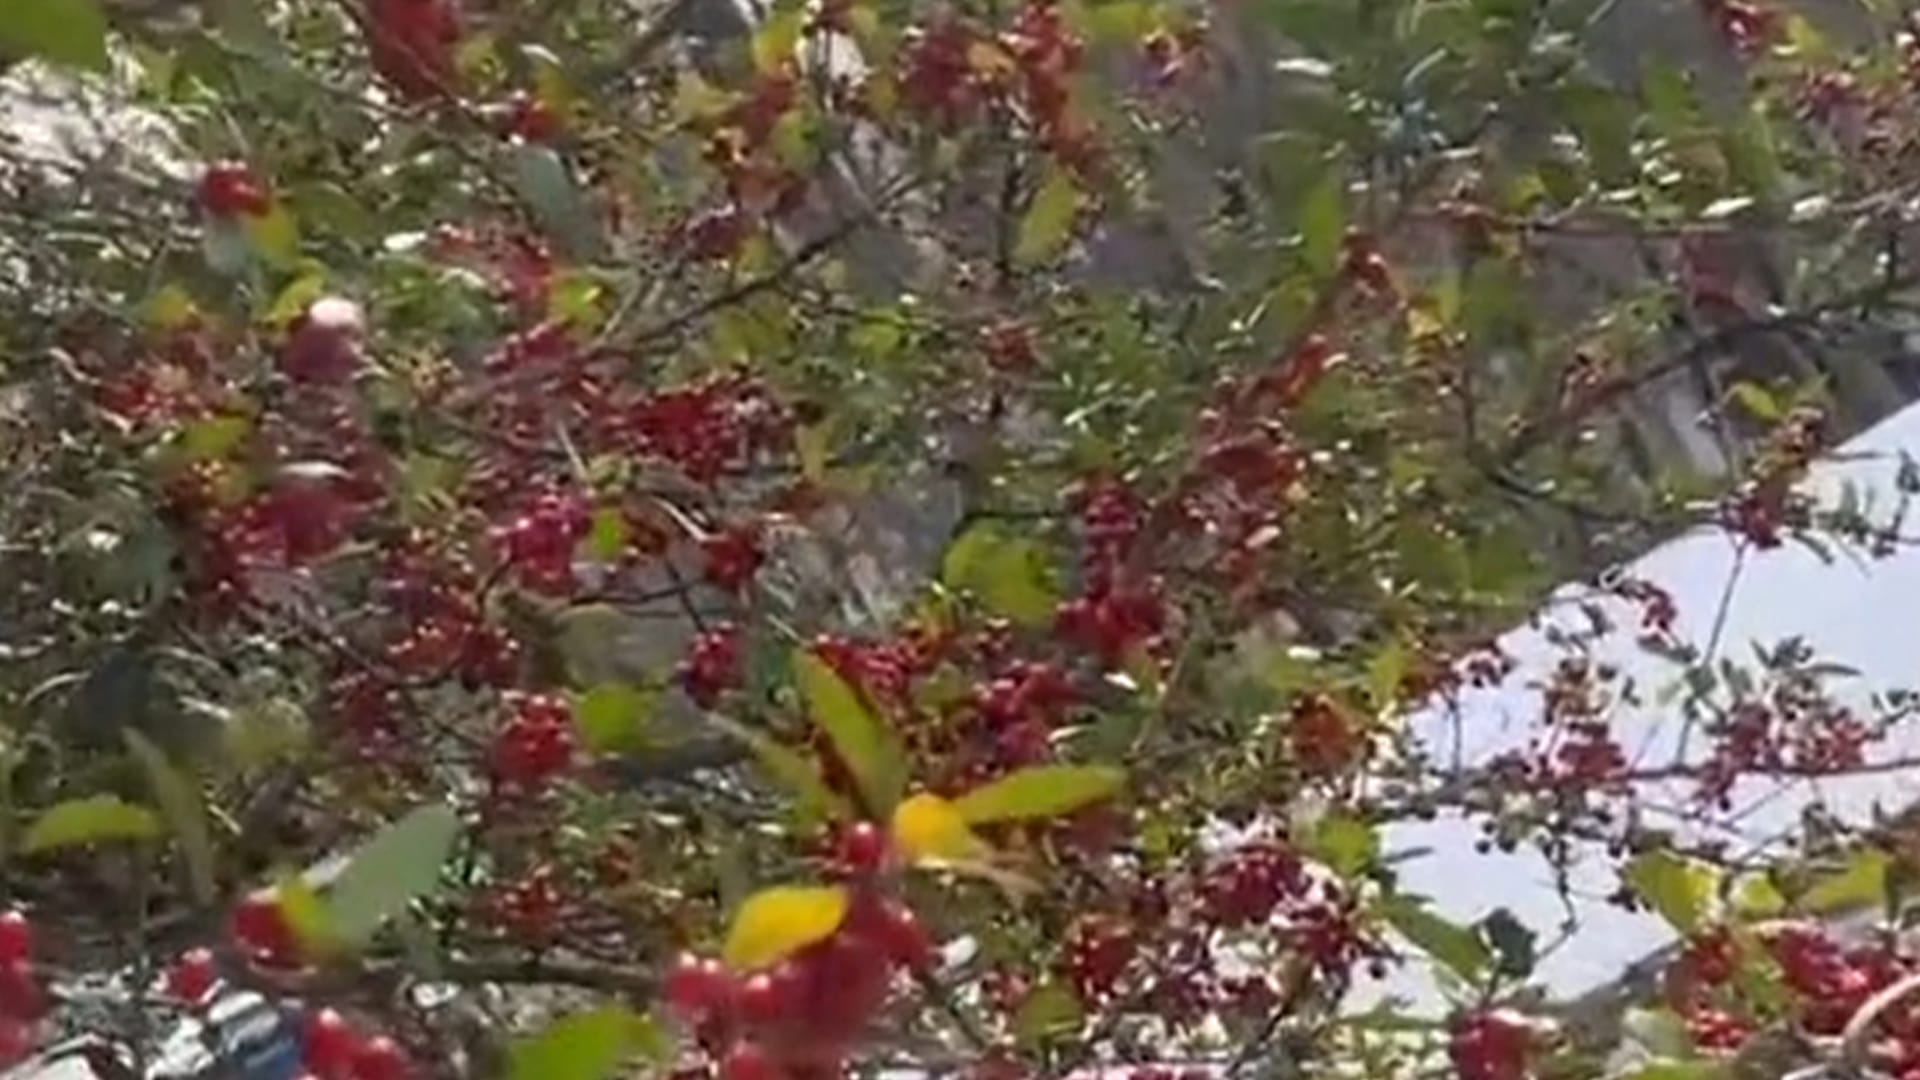 You have 20/20 vision if you can spot the red bird sitting in the fruit tree in under 10 seconds